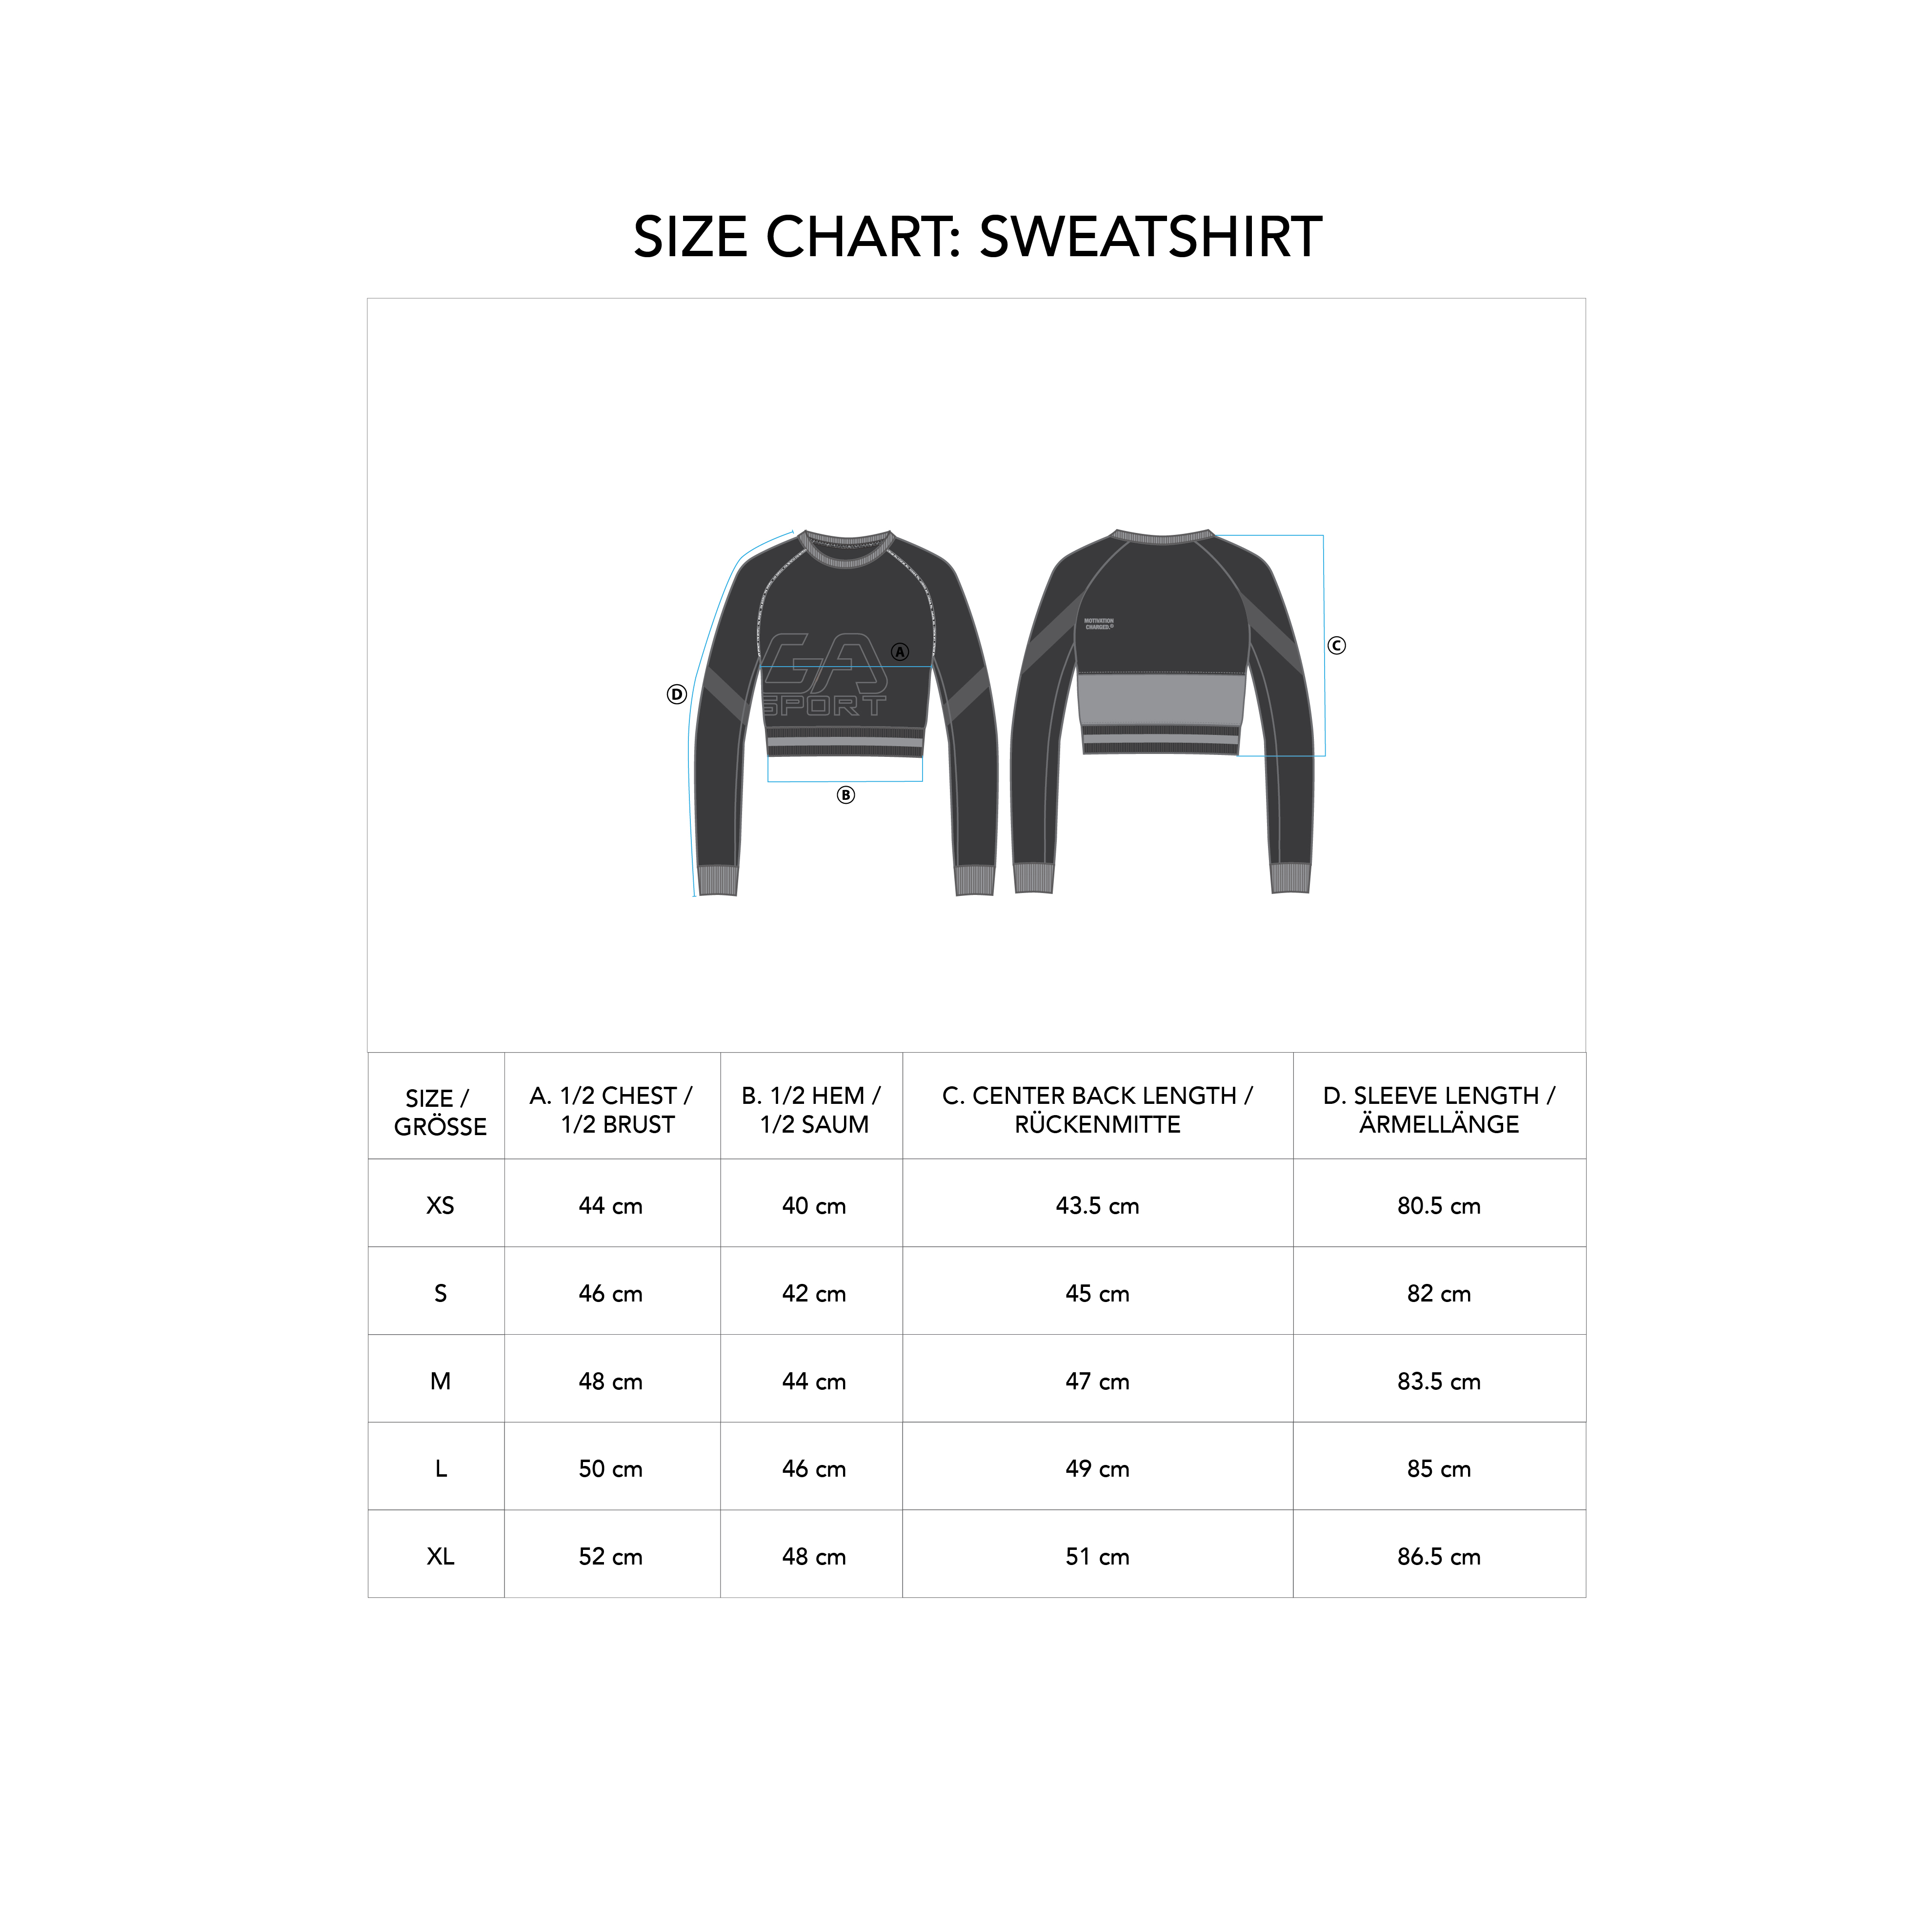 Athleisure Cropped Sweatshirt for Women - size chart